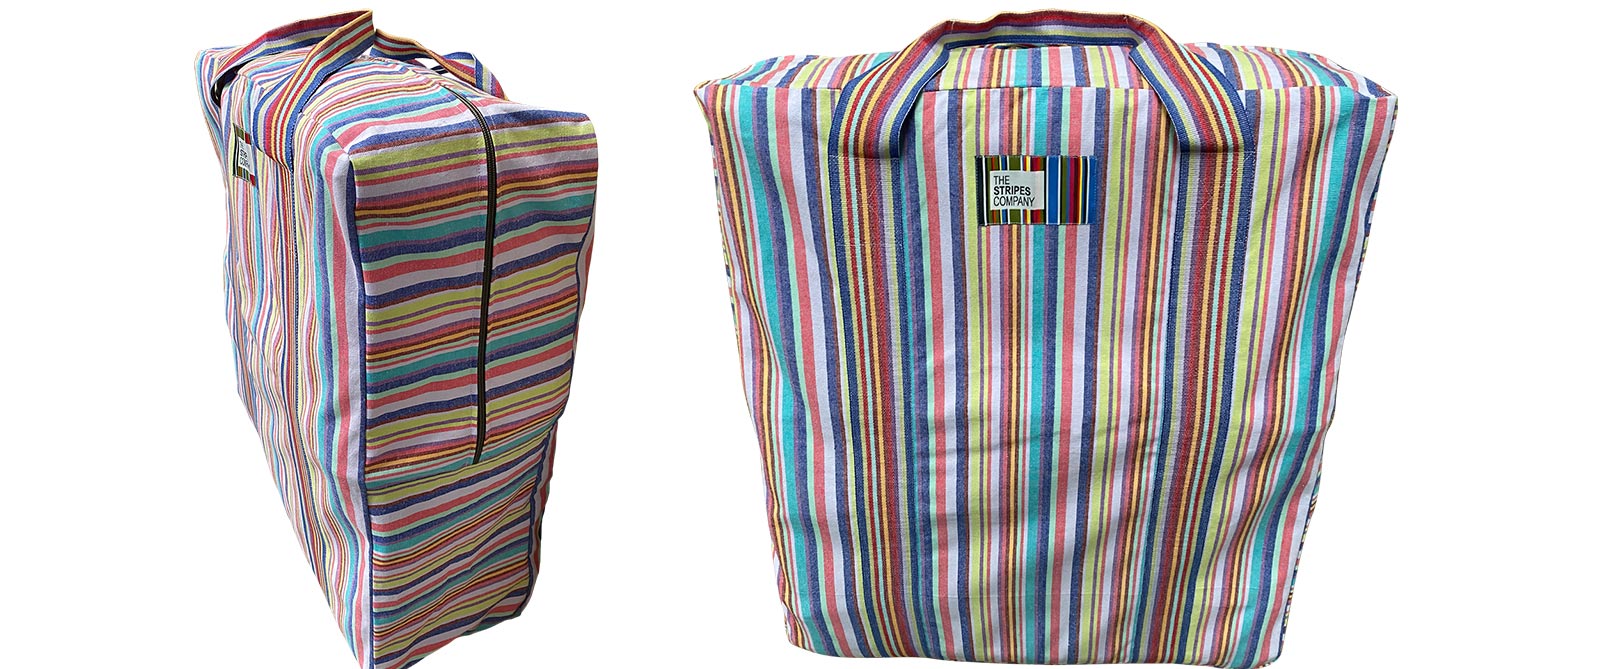 Large Storage Bag for Bedding, Cushions, Textiles, Pillows